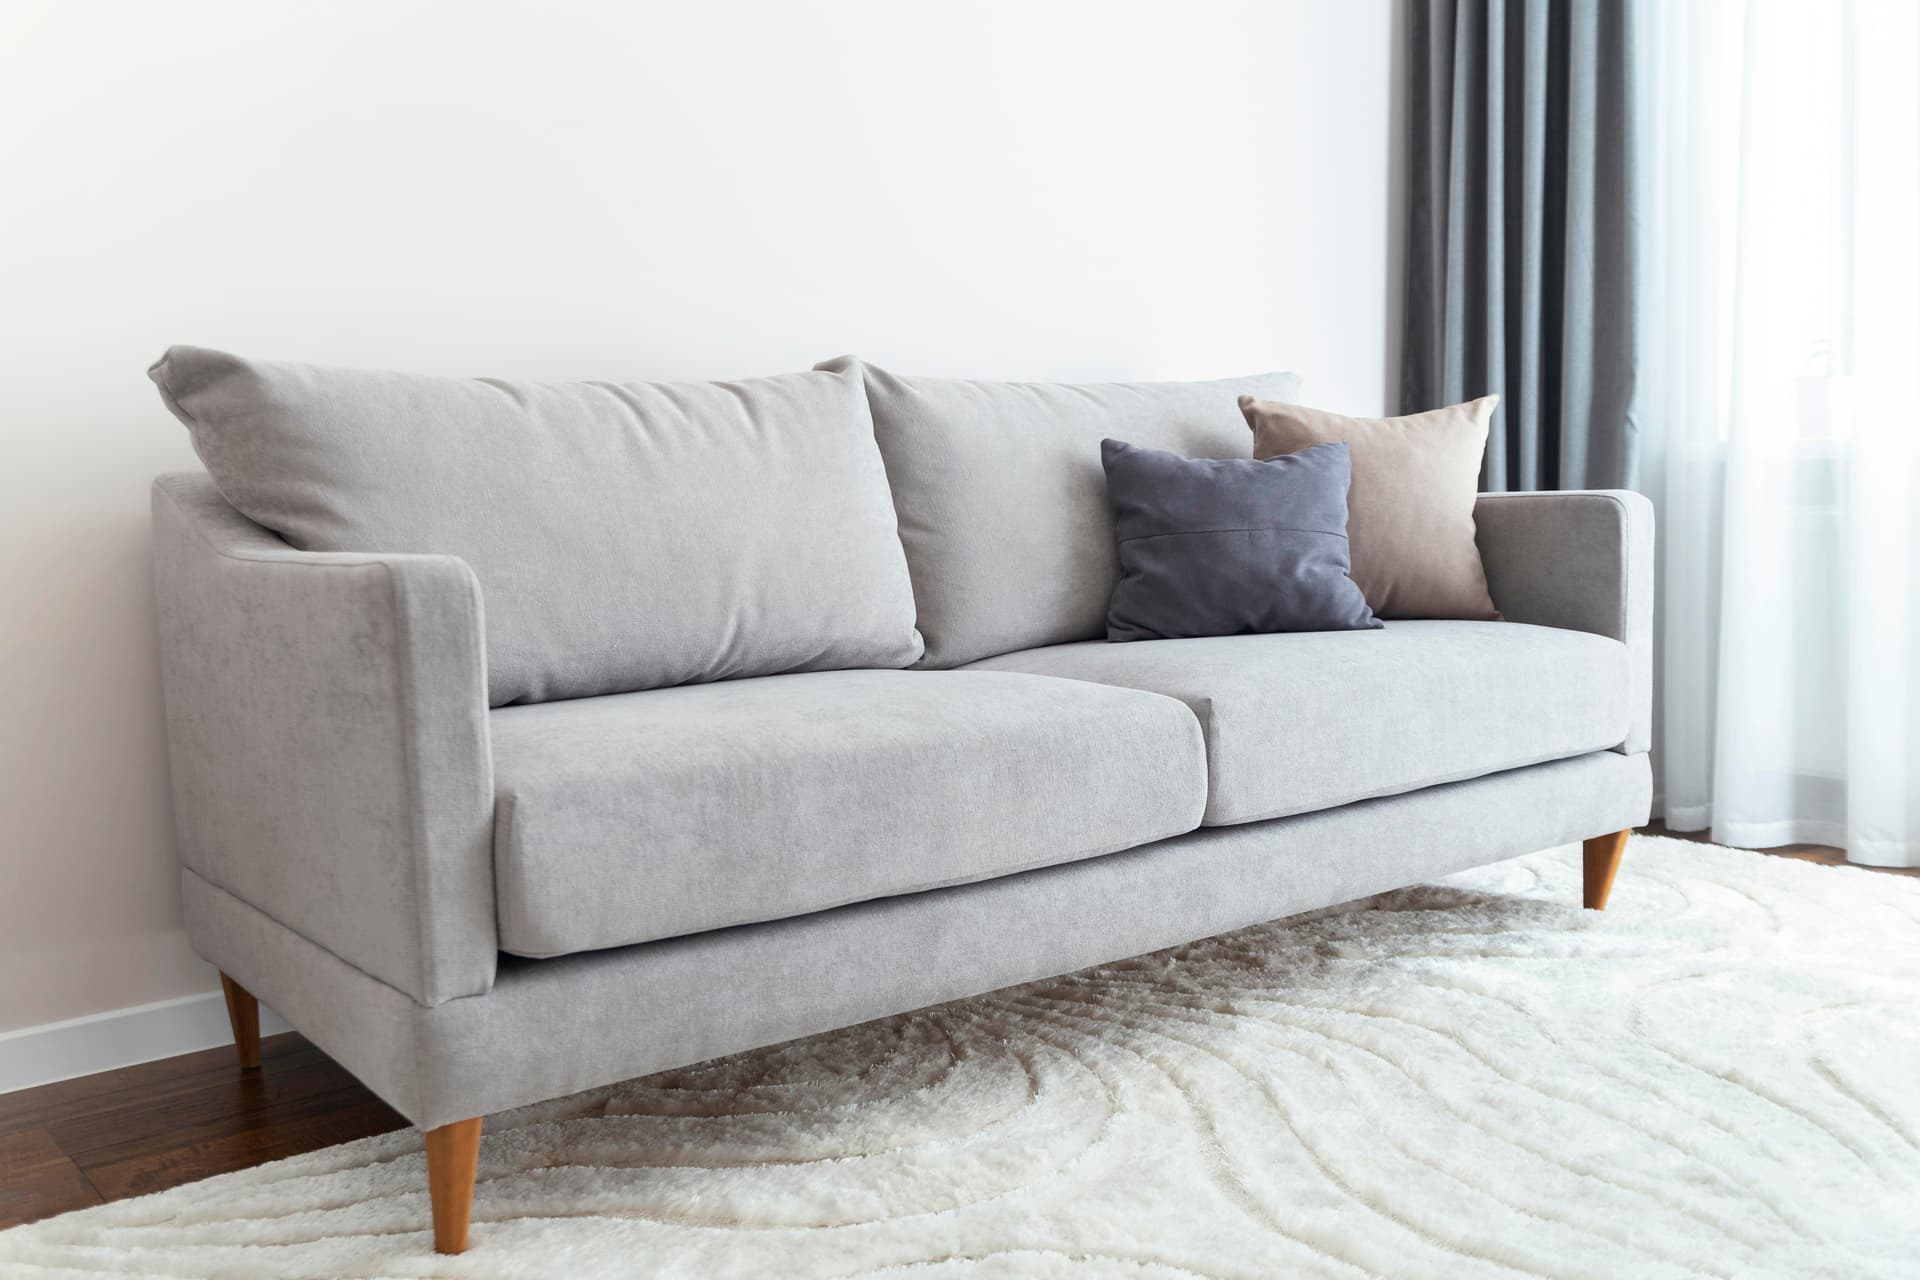 Sofa Cleaning Made Easy: Quick Hacks for Tackling Common Stains